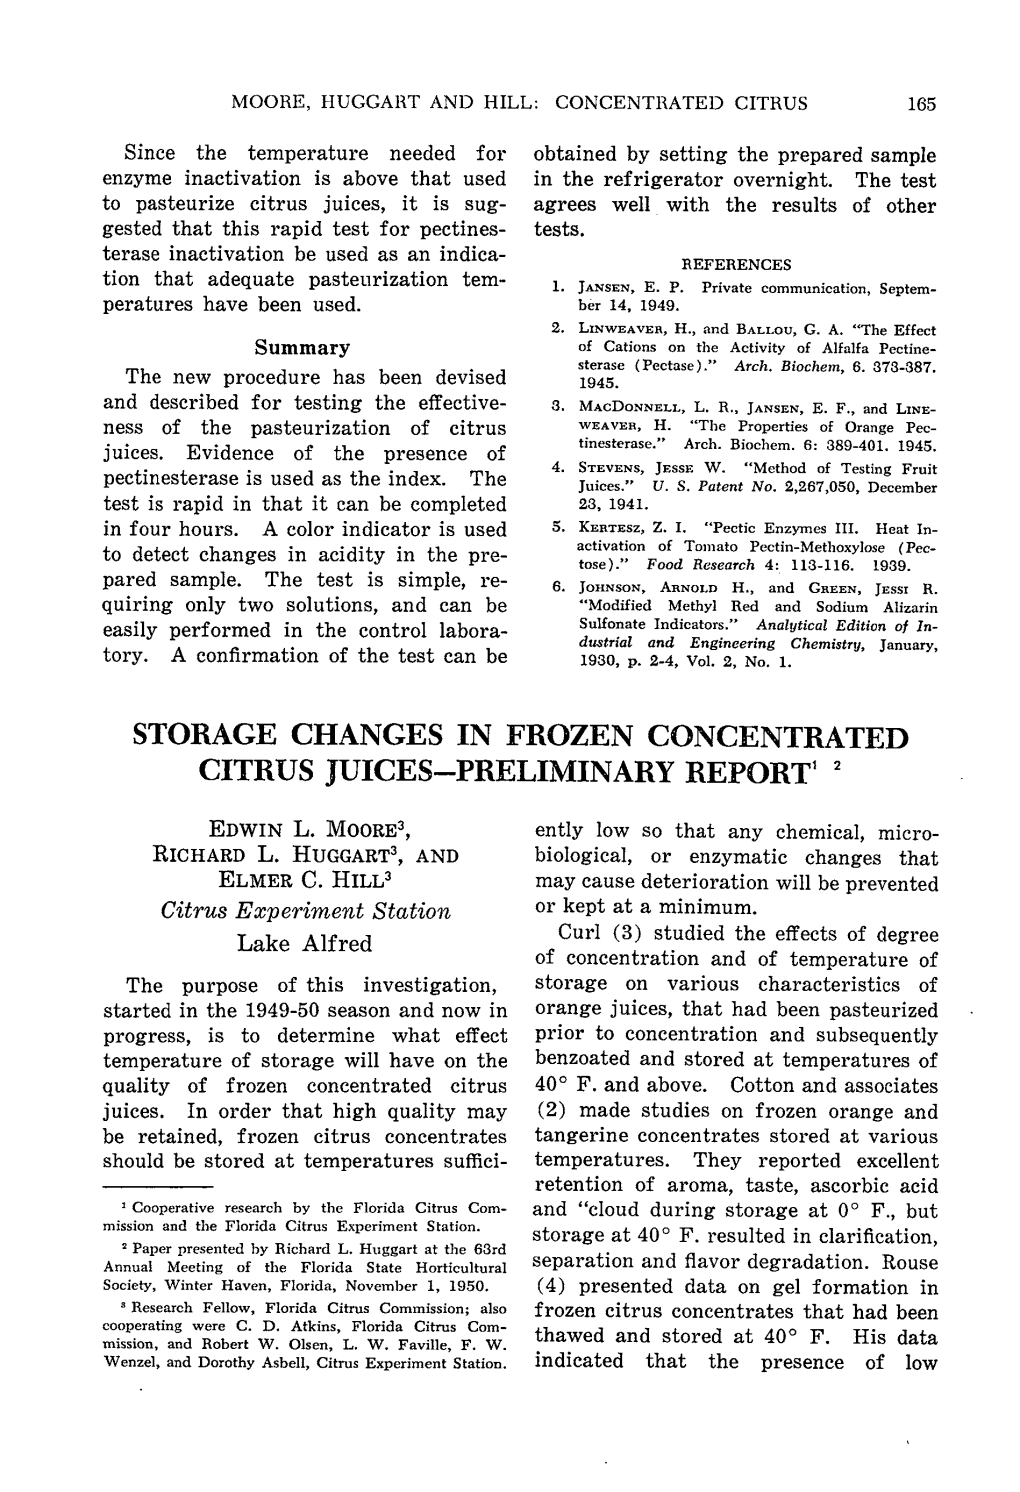 Storage Changes in Frozen Concentrated Citrus Juices-Preliminary Report1 2